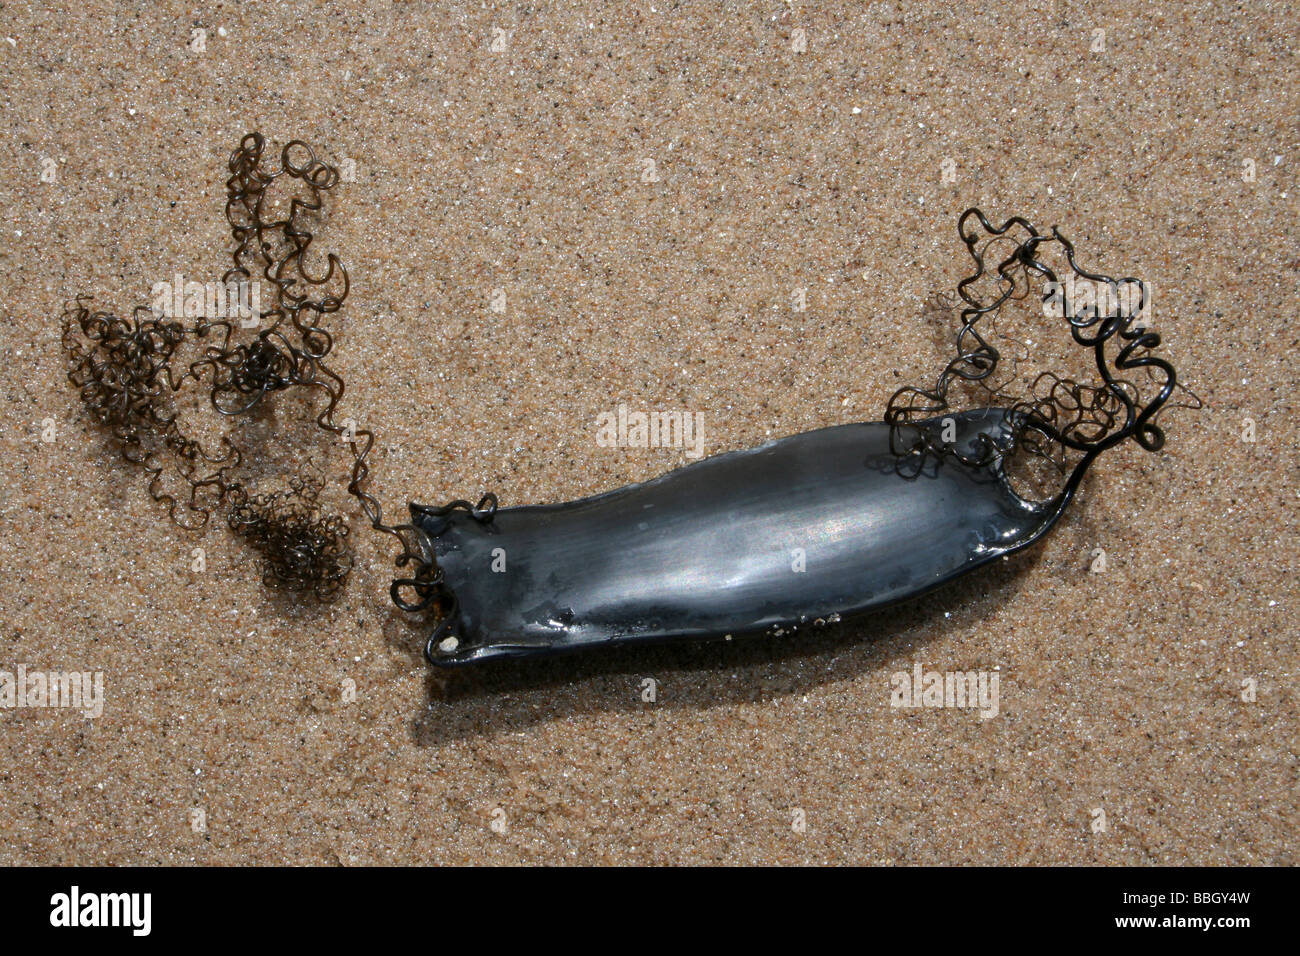 mermaids purse the egg case of a lesser spotted dogfish scyliorhinus BBGY4W